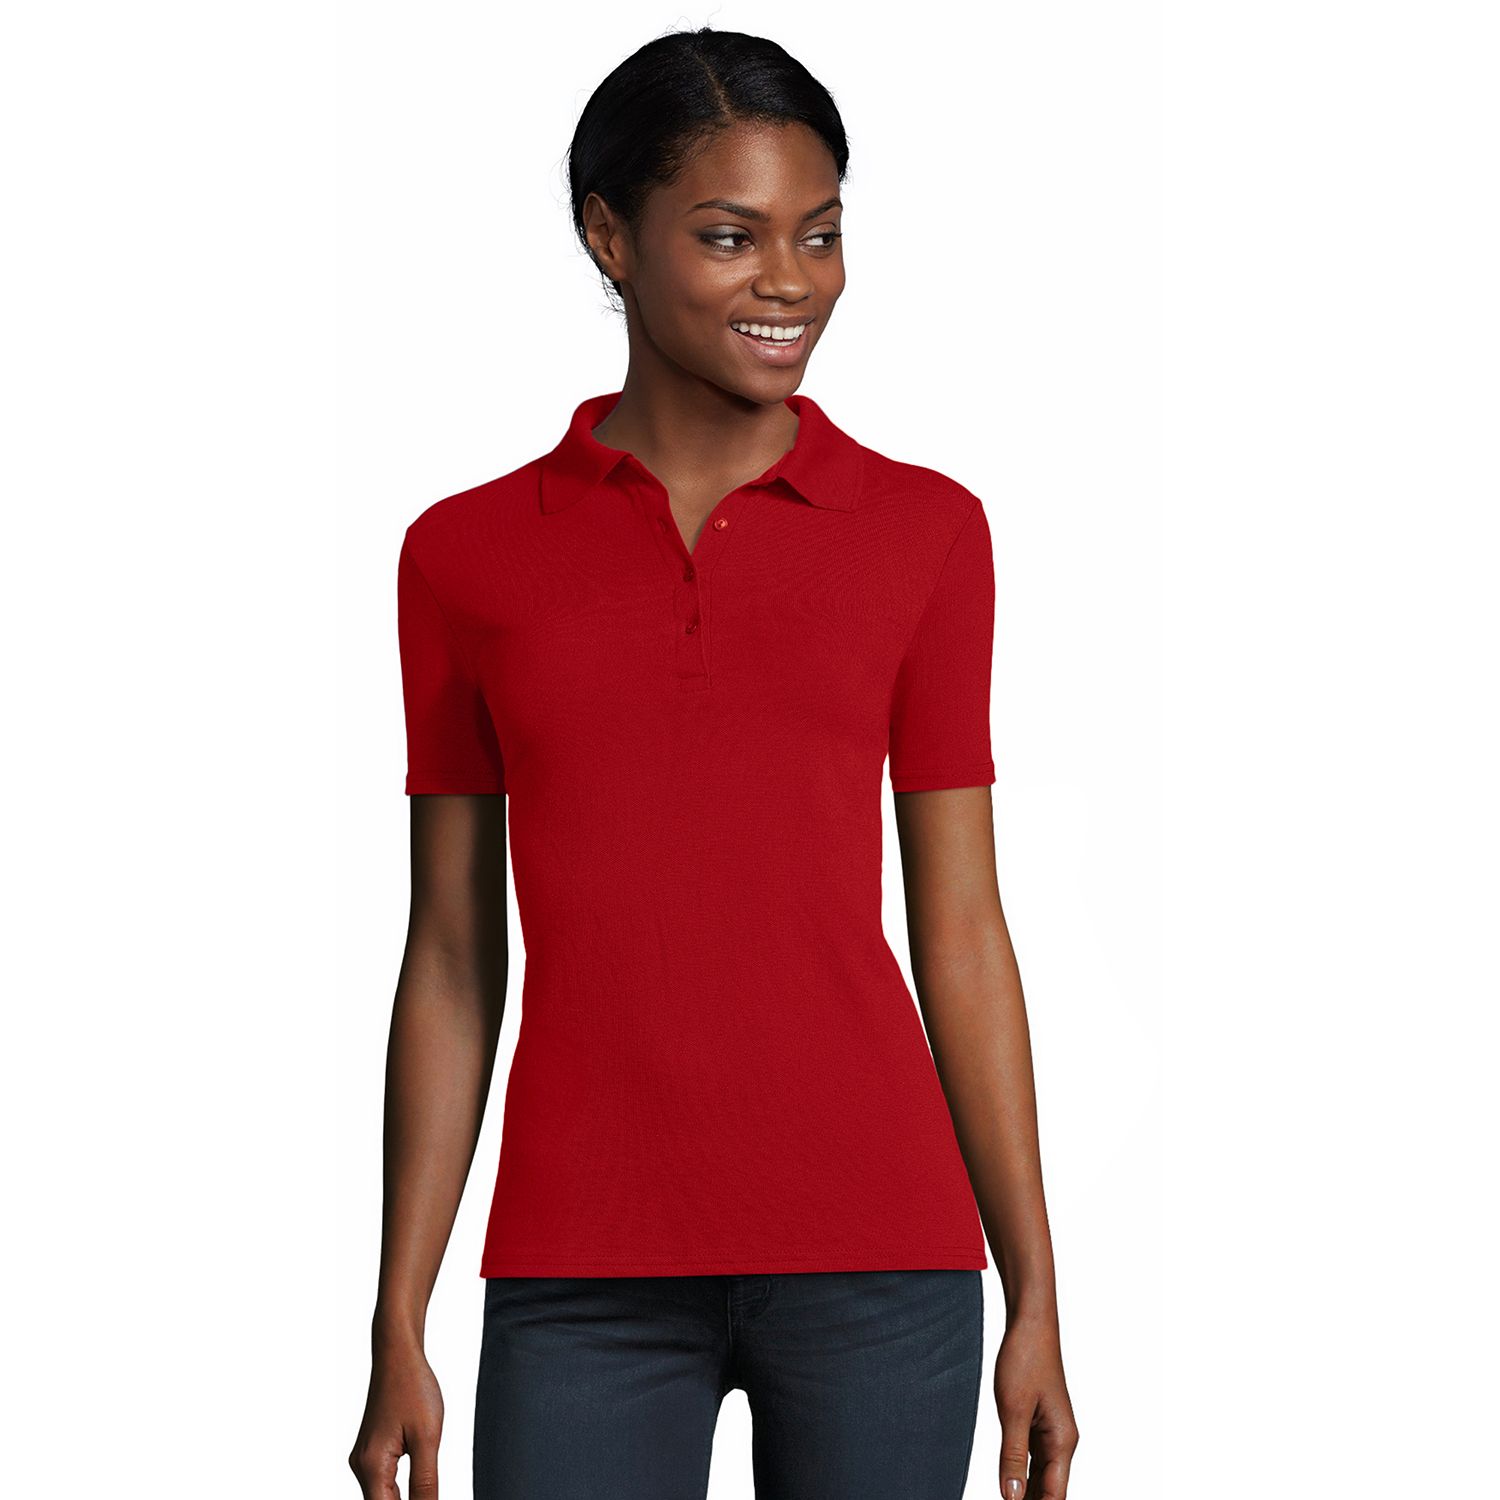 red polo shirt womens outfit